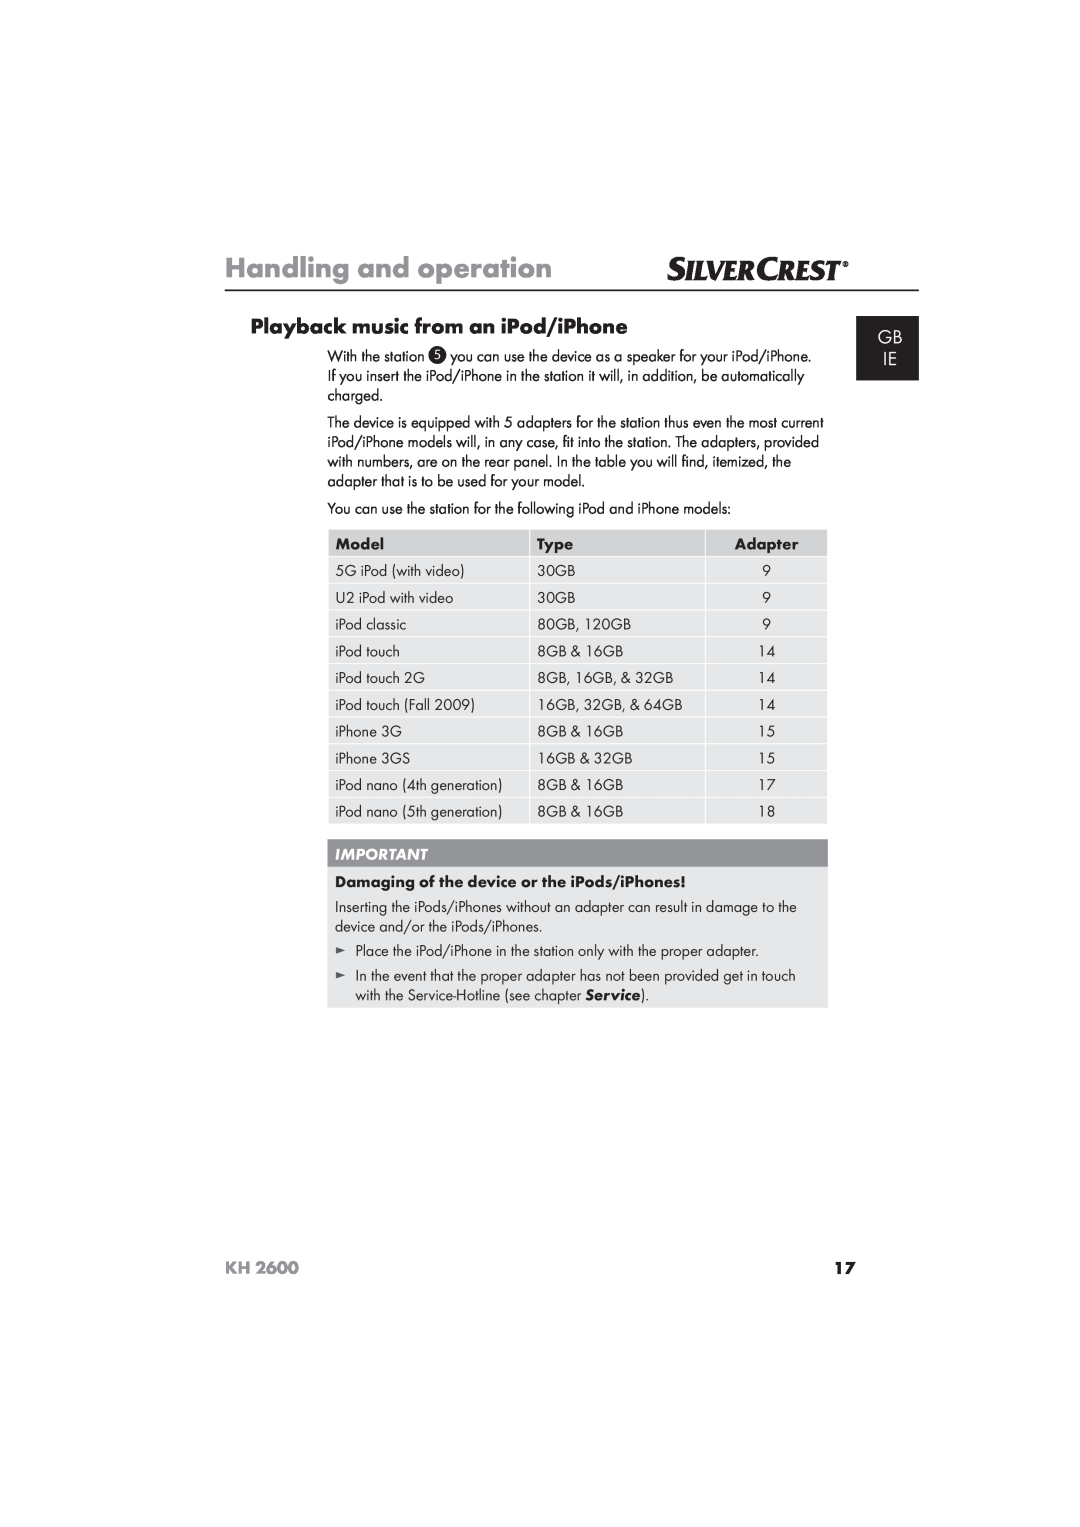 Silvercrest KH 2600 manual Playback music from an iPod/iPhone, Handling and operation, Gb Ie 